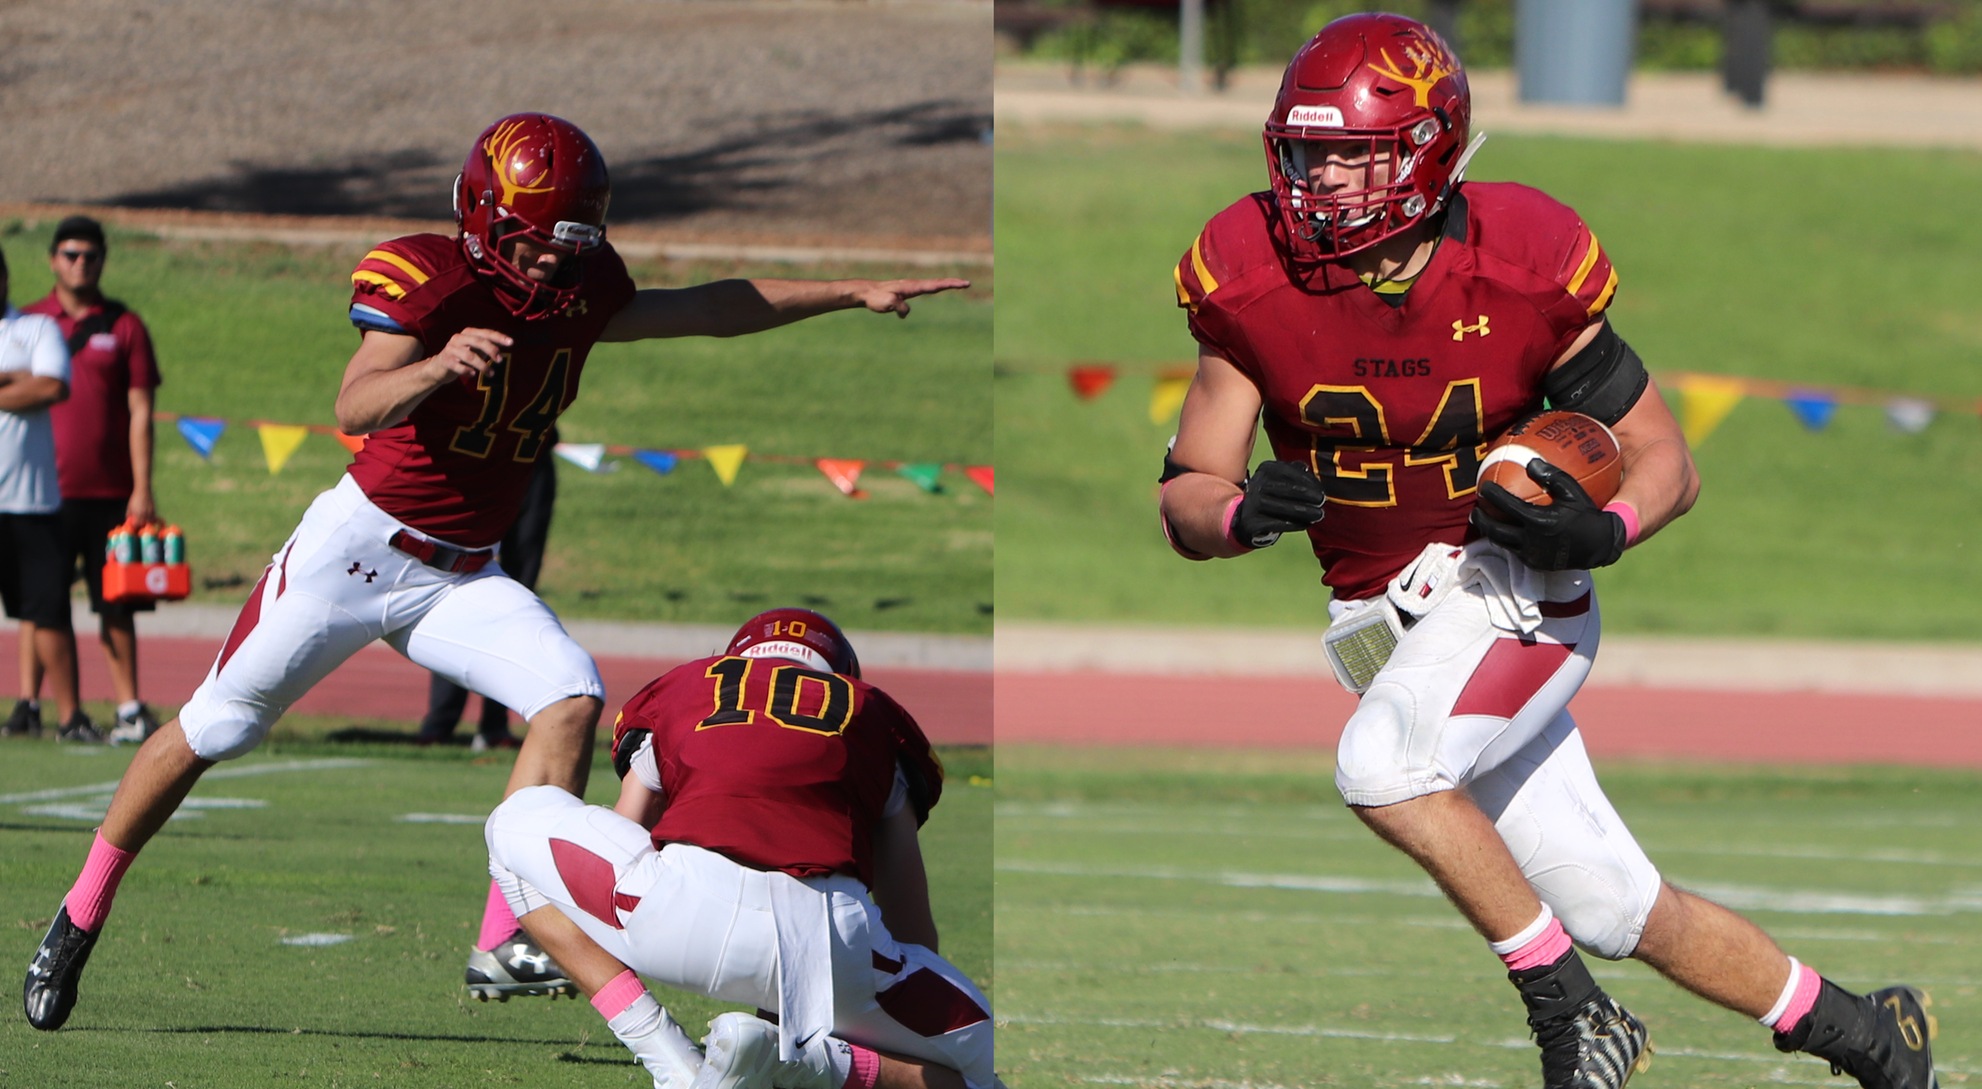 Maiuolo, Cheadle Win SCIAC Player of the Week Honors for CMS Football